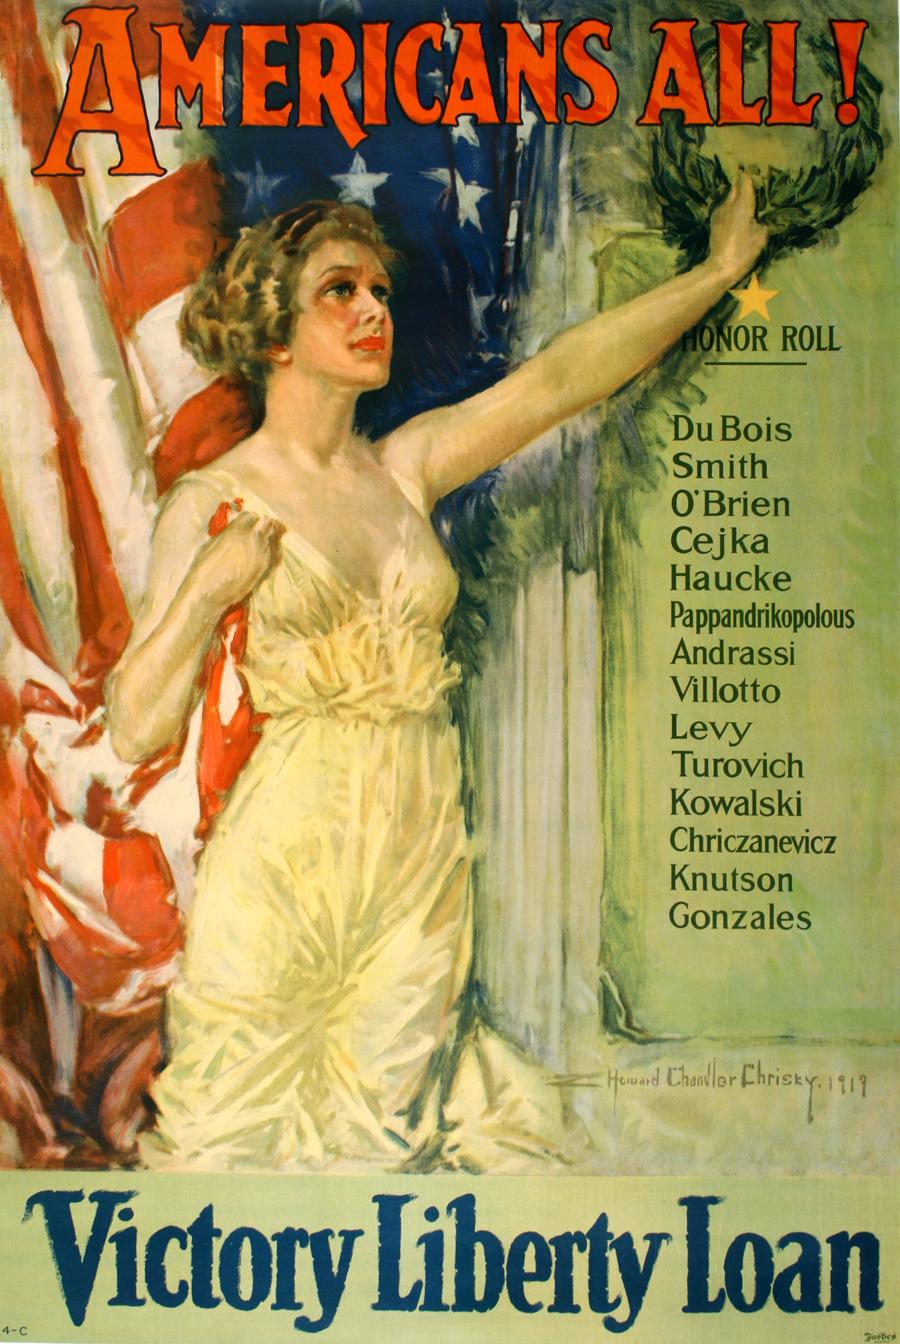 Americans All! Victory Liberty Loan Original Vintage WWI Poster by Christy 1919 - Print by Howard Chandler Christy